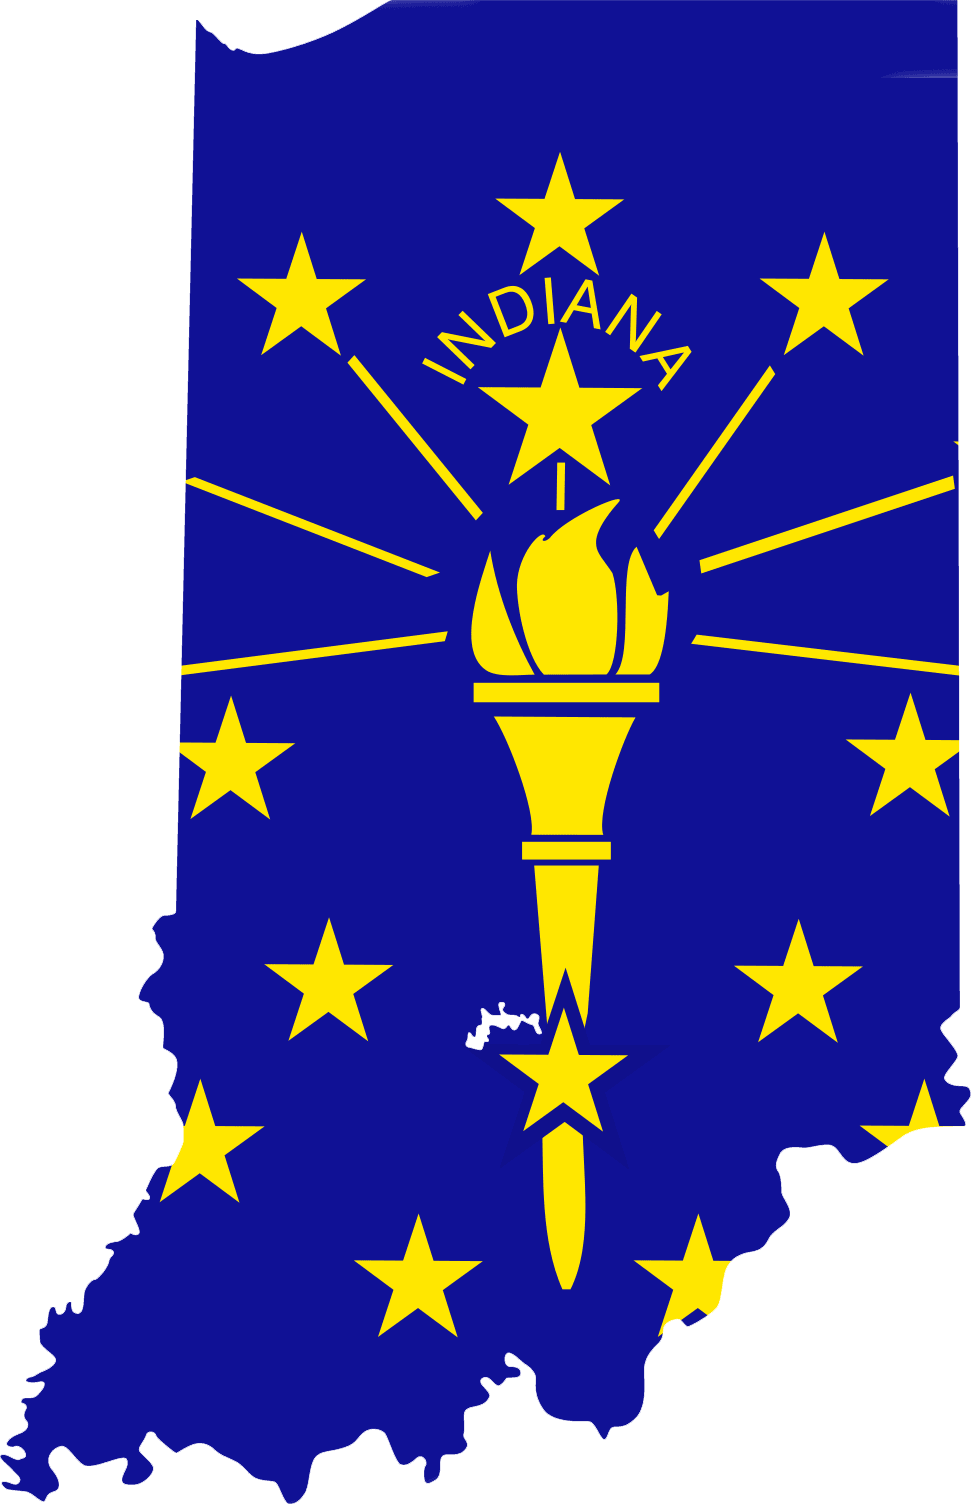 indiana map clipart - Clipground